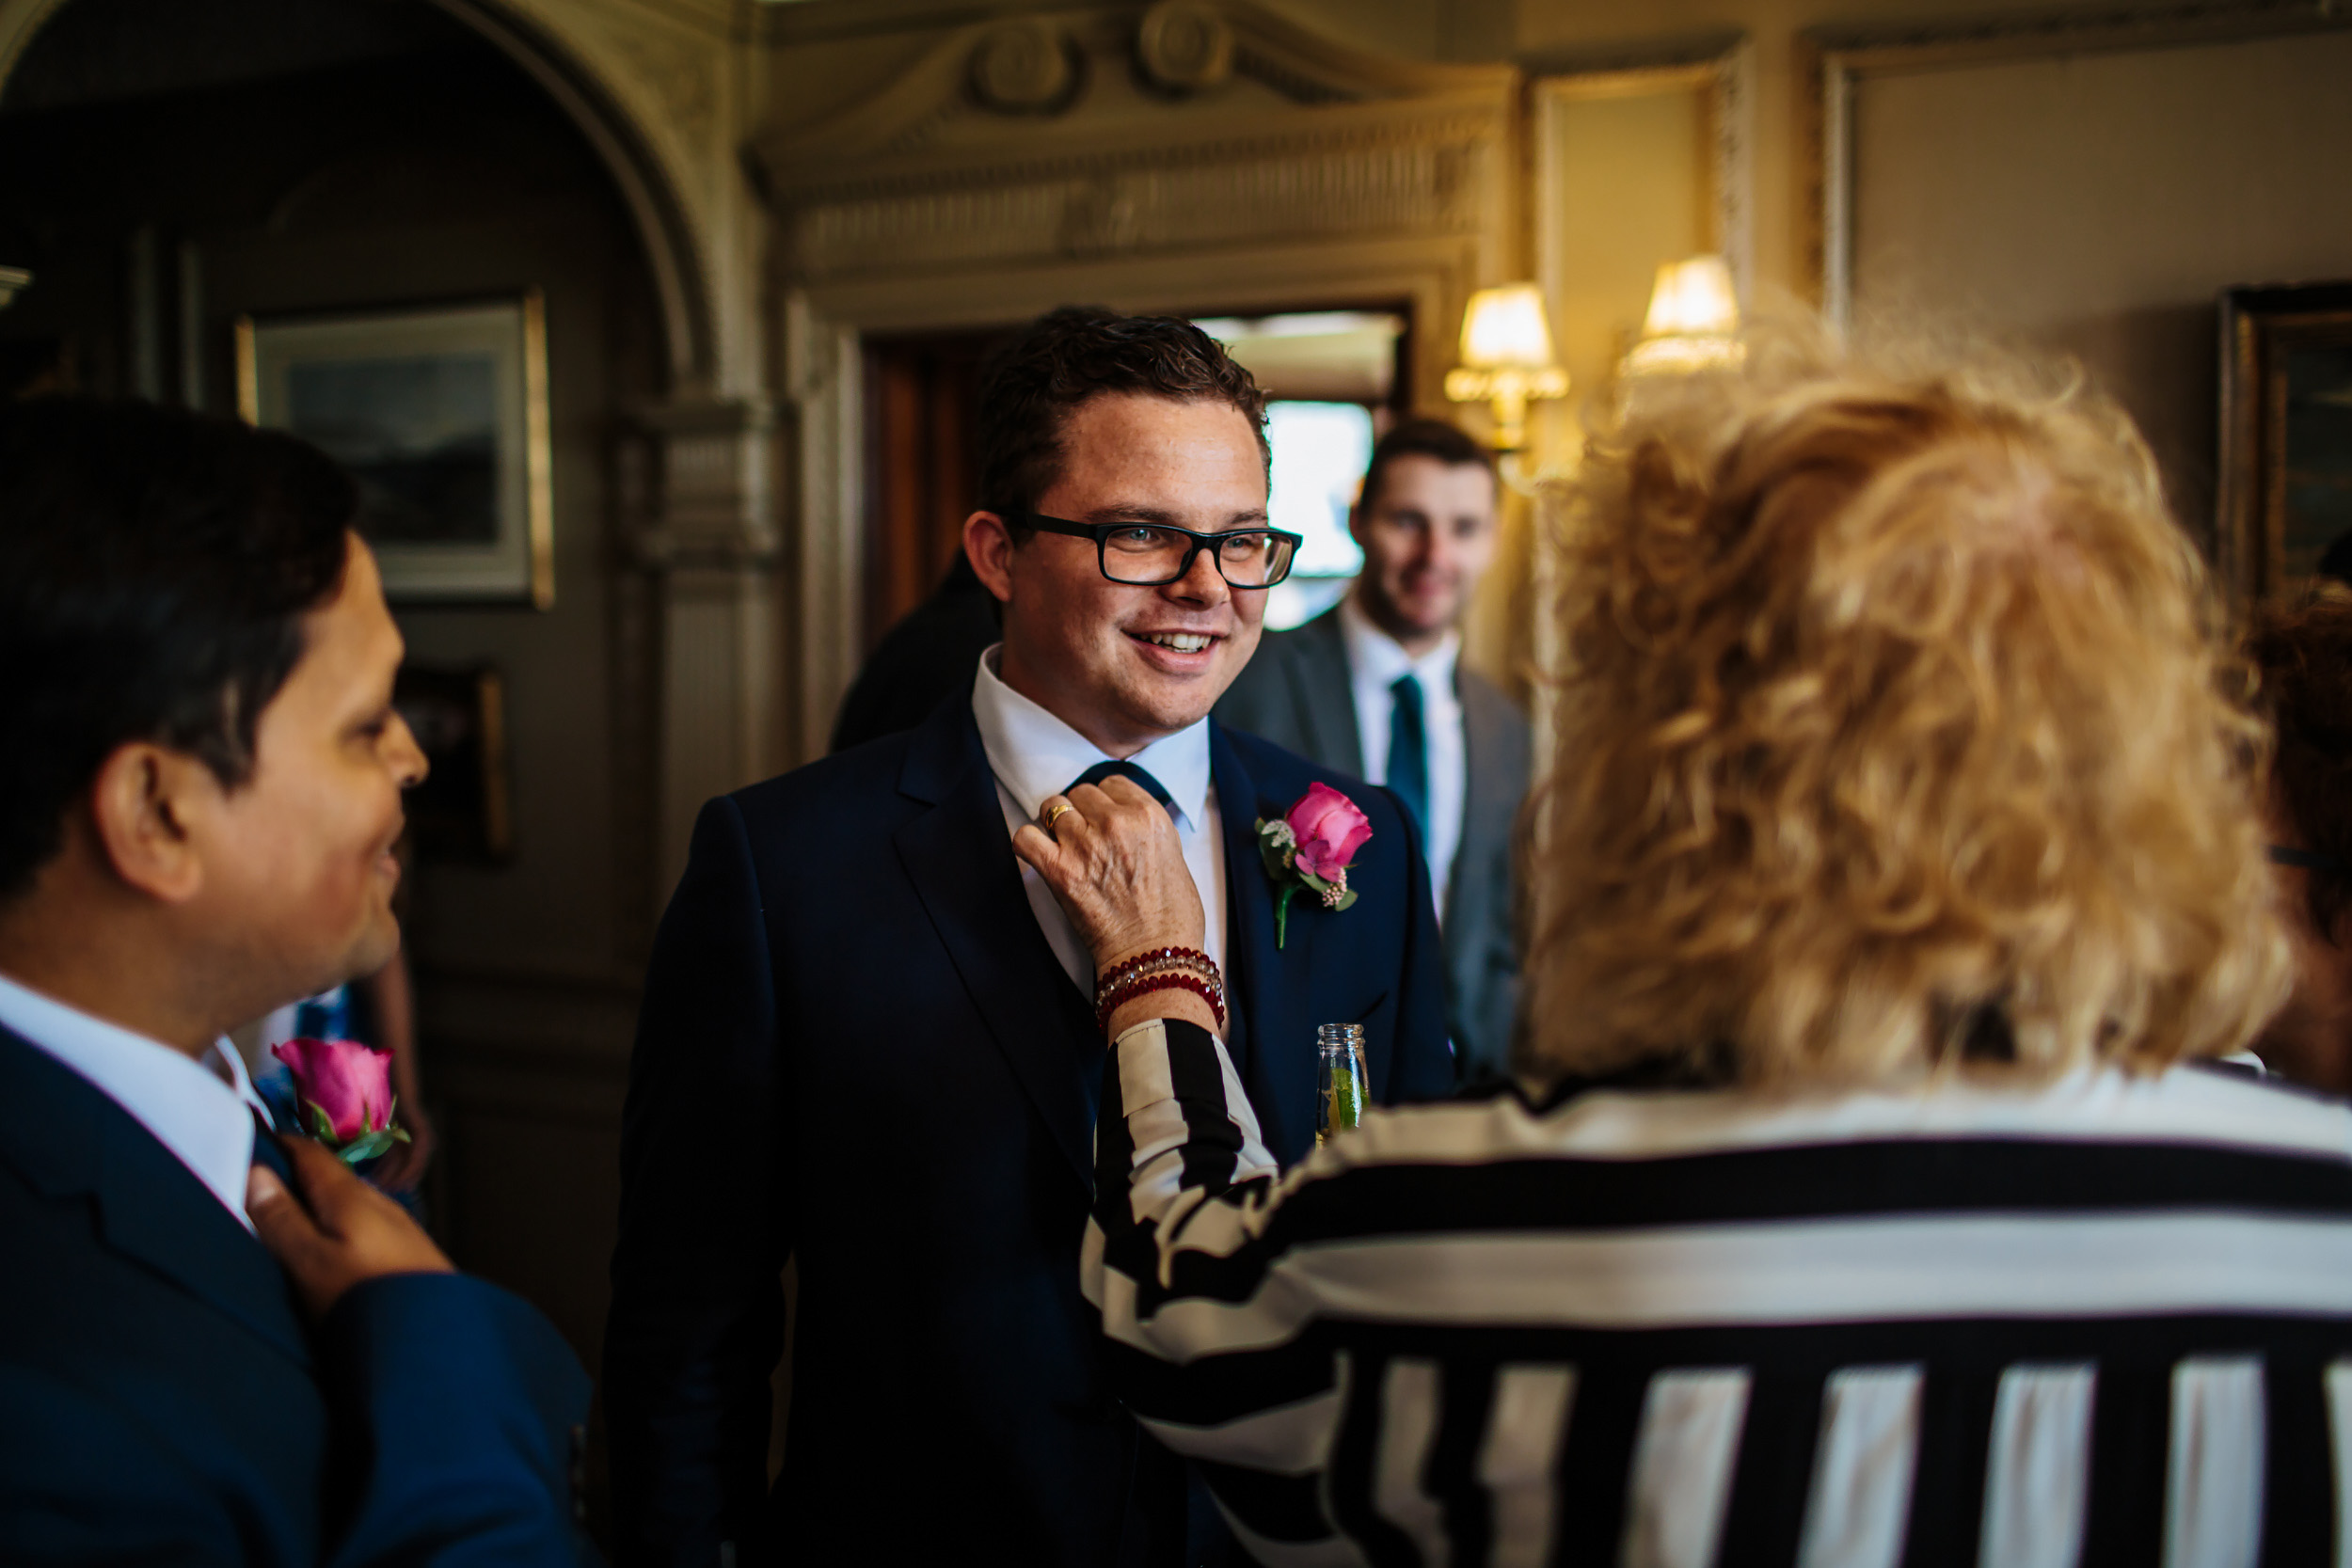 Grooms mother adjusts his tie at a wedding in Cheshire